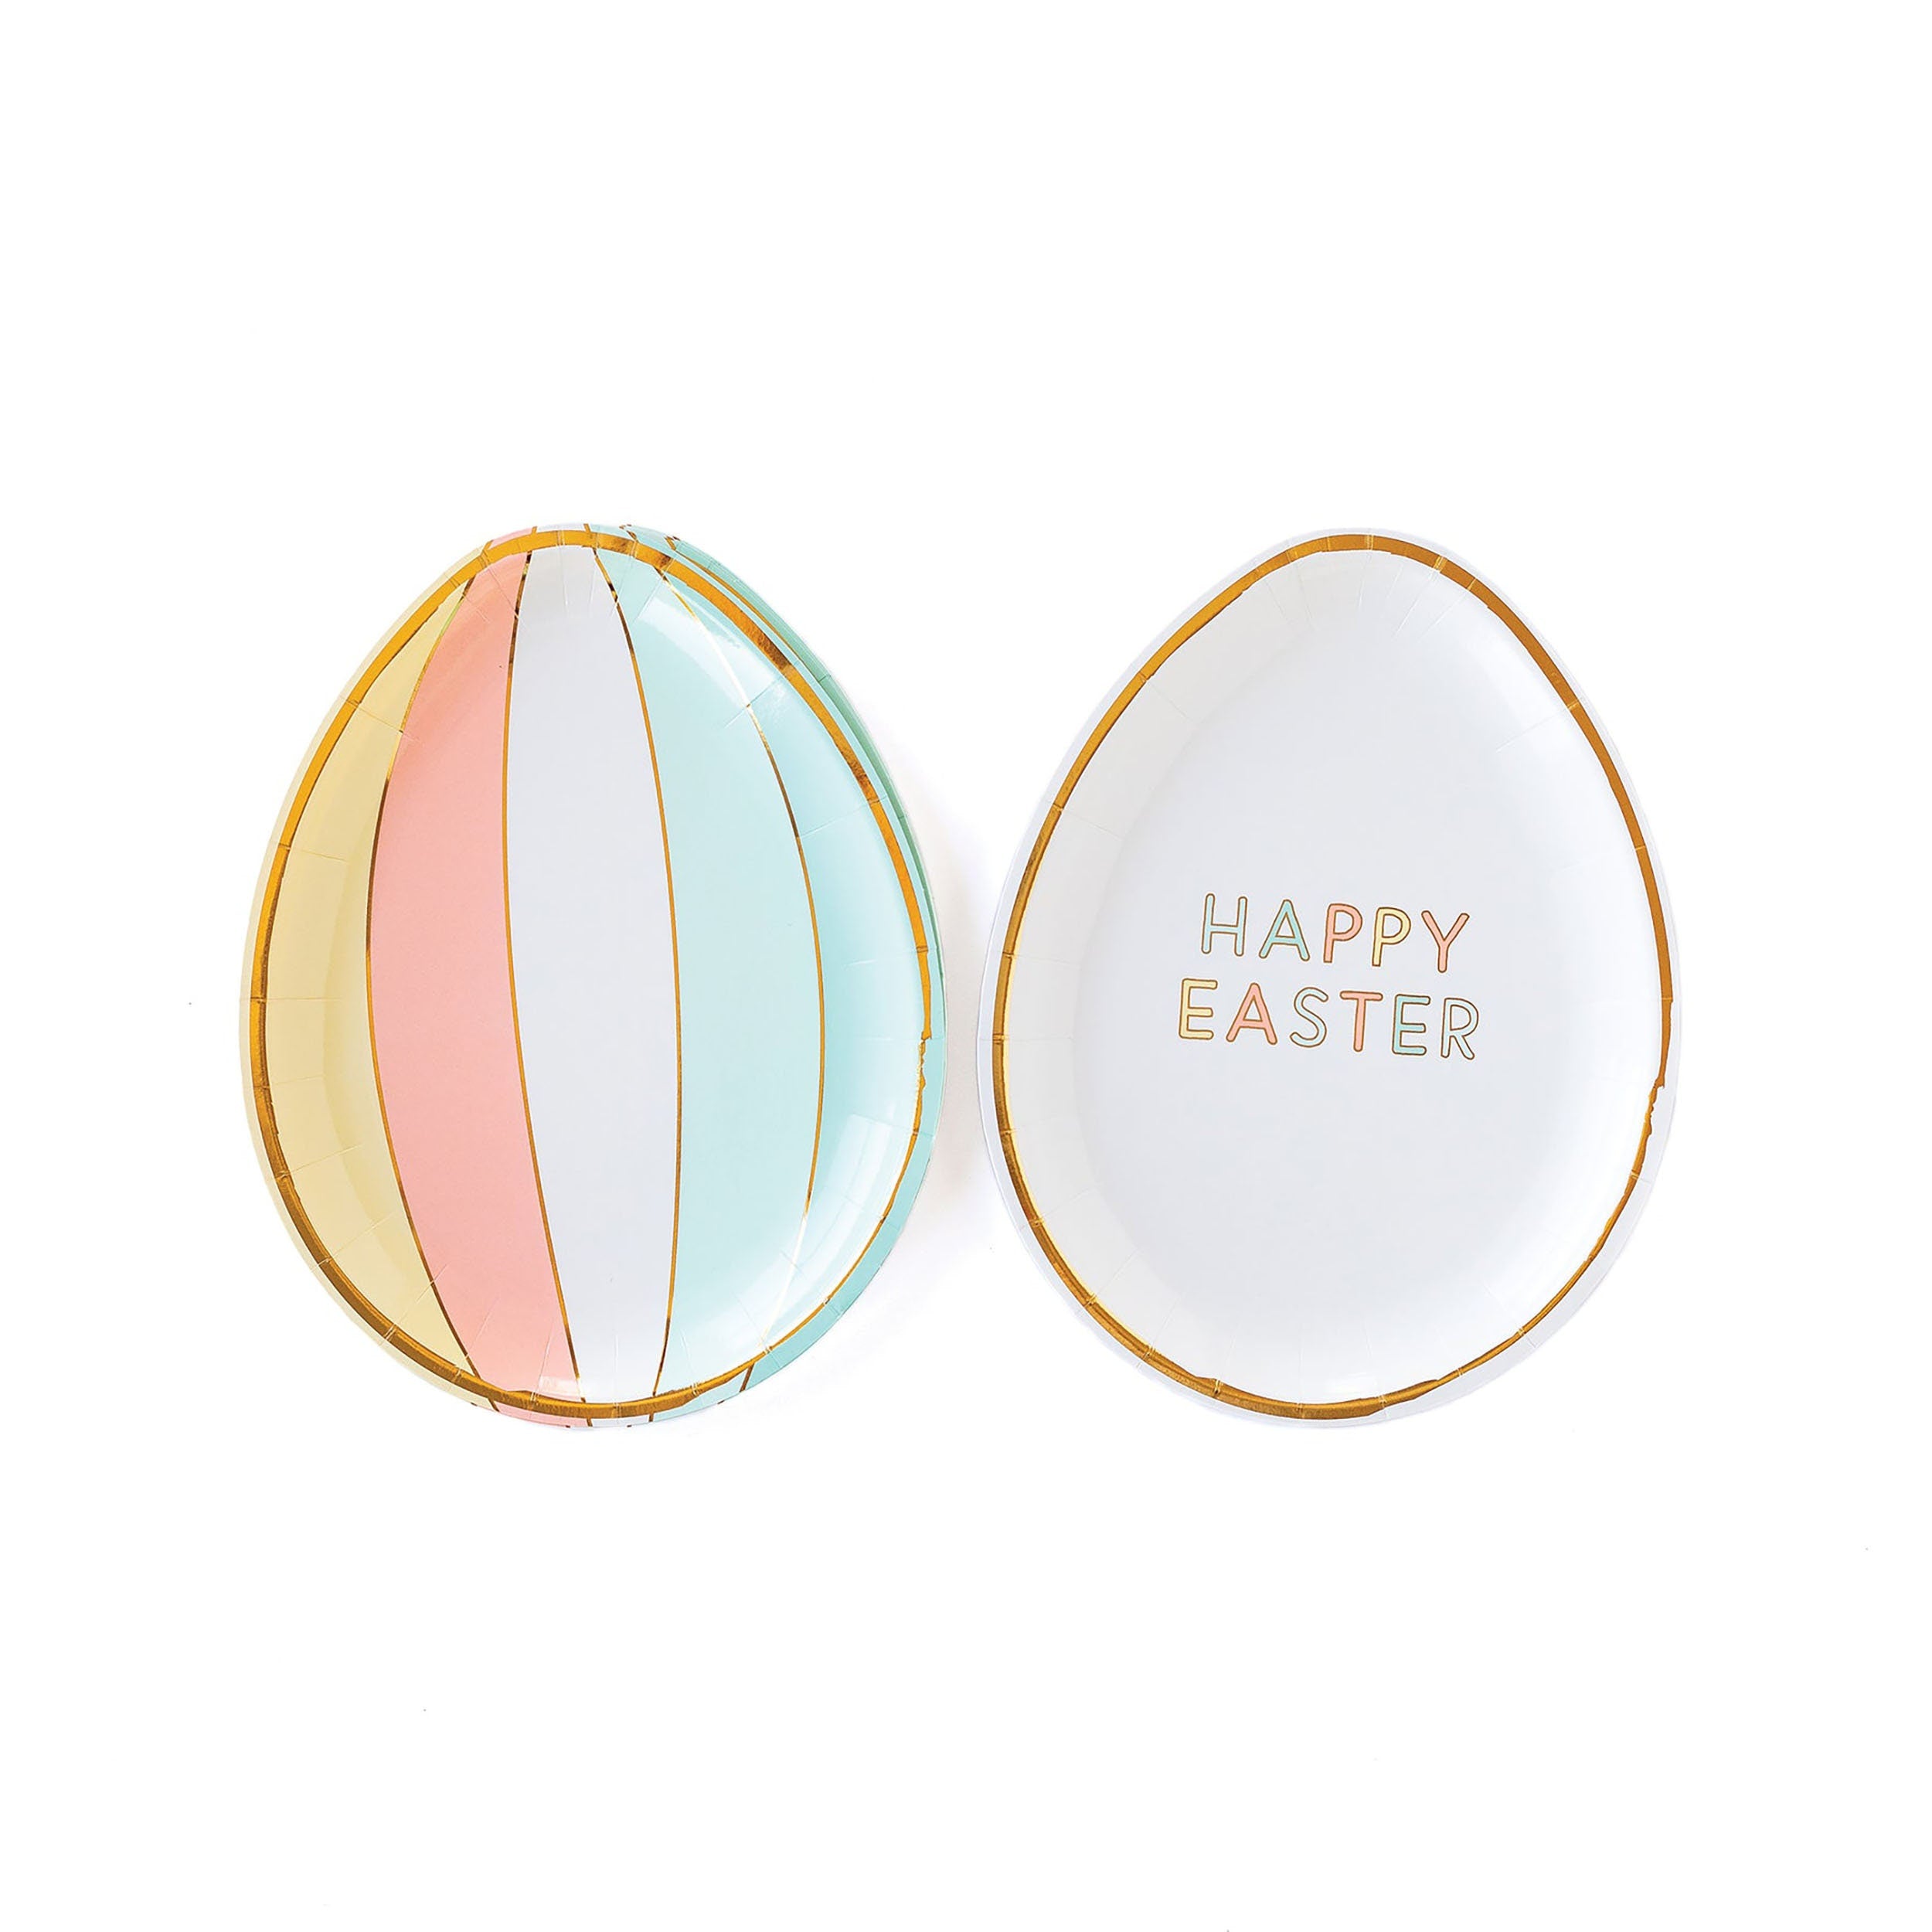 Easter Egg Plates | Easter Tableware - Easter Plates - Easter Egg Shaped Plates - Easter Paper Plate - Easter Decor - Easter Party Supplies